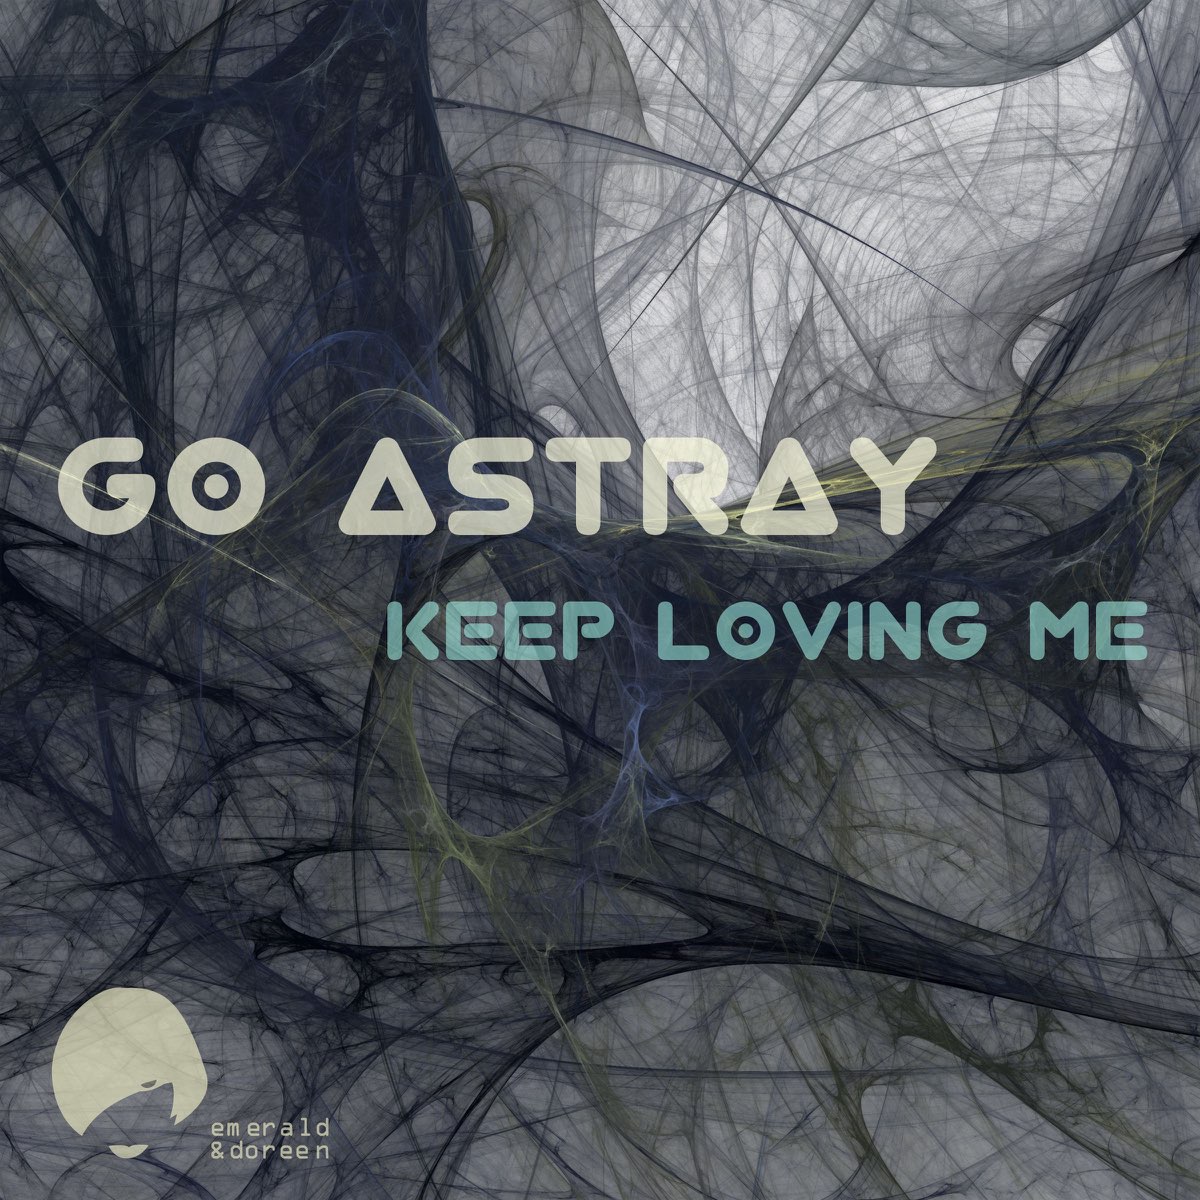 Keep your love. Gone Astray. Keep loving.